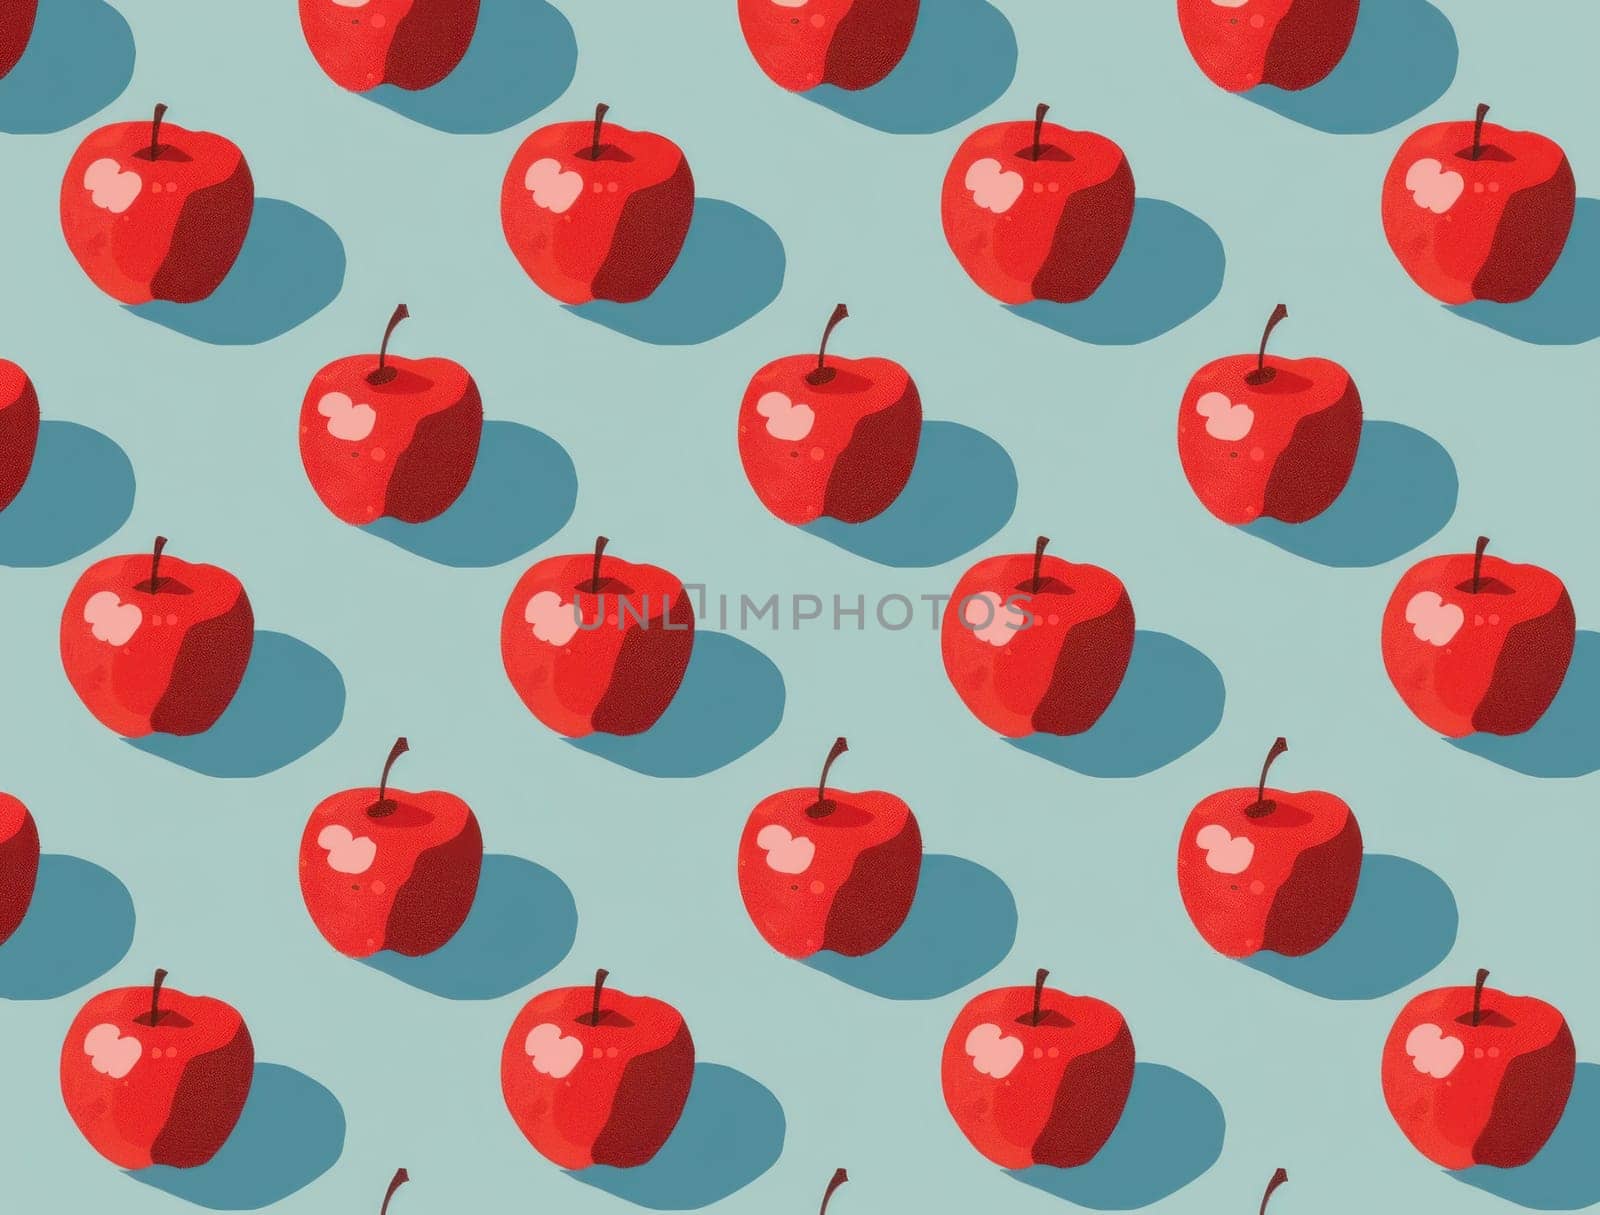 Apple orchard delight vibrant seamless pattern of red apples on blue background with shadows and highlights by Vichizh